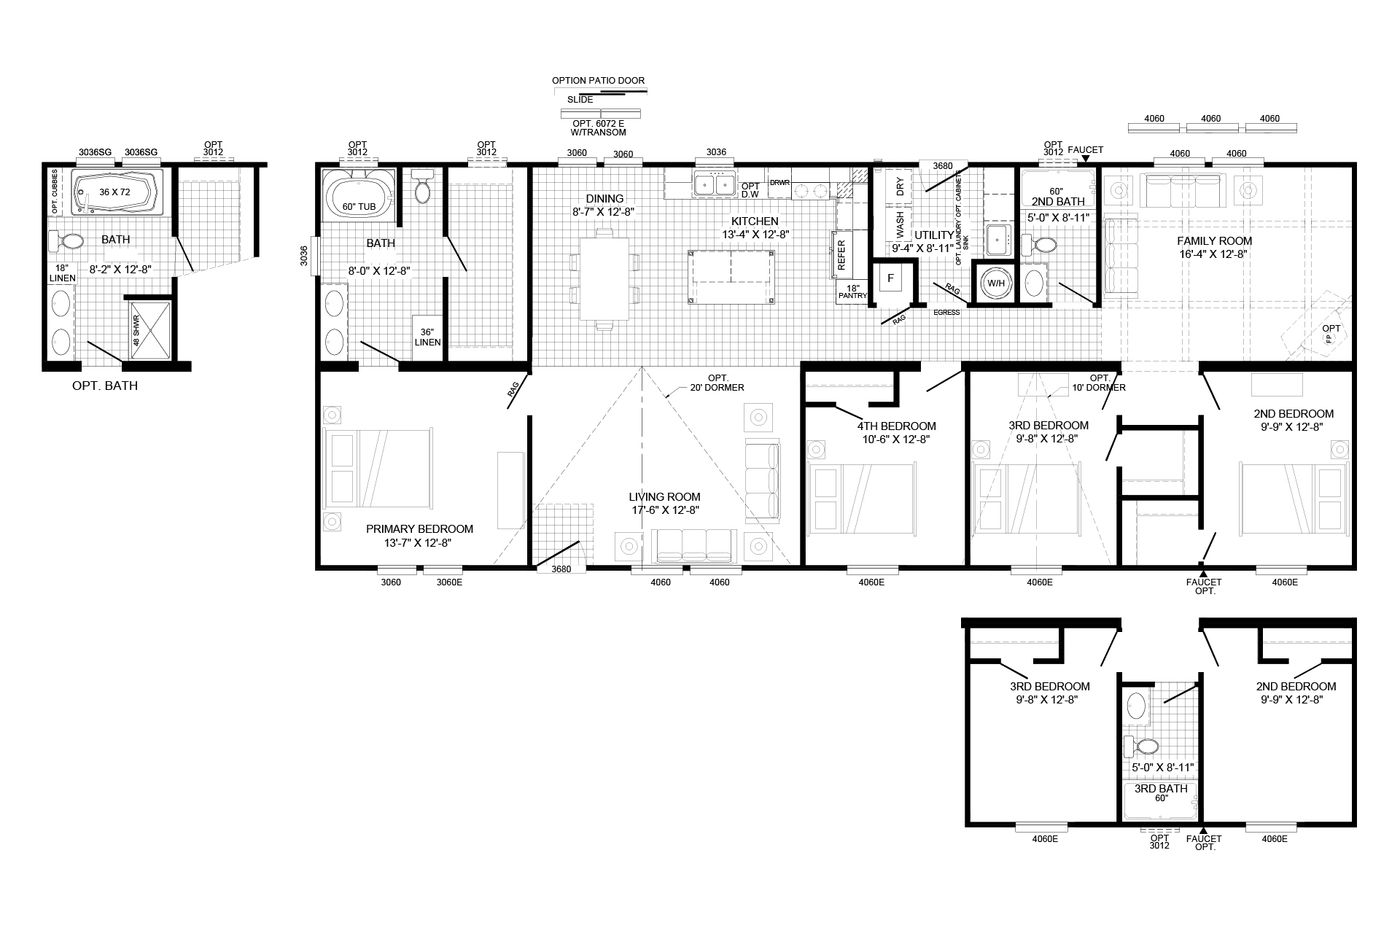 The THE KNIGHT Floor Plan. This Manufactured Mobile Home features 4 bedrooms and 2 baths.